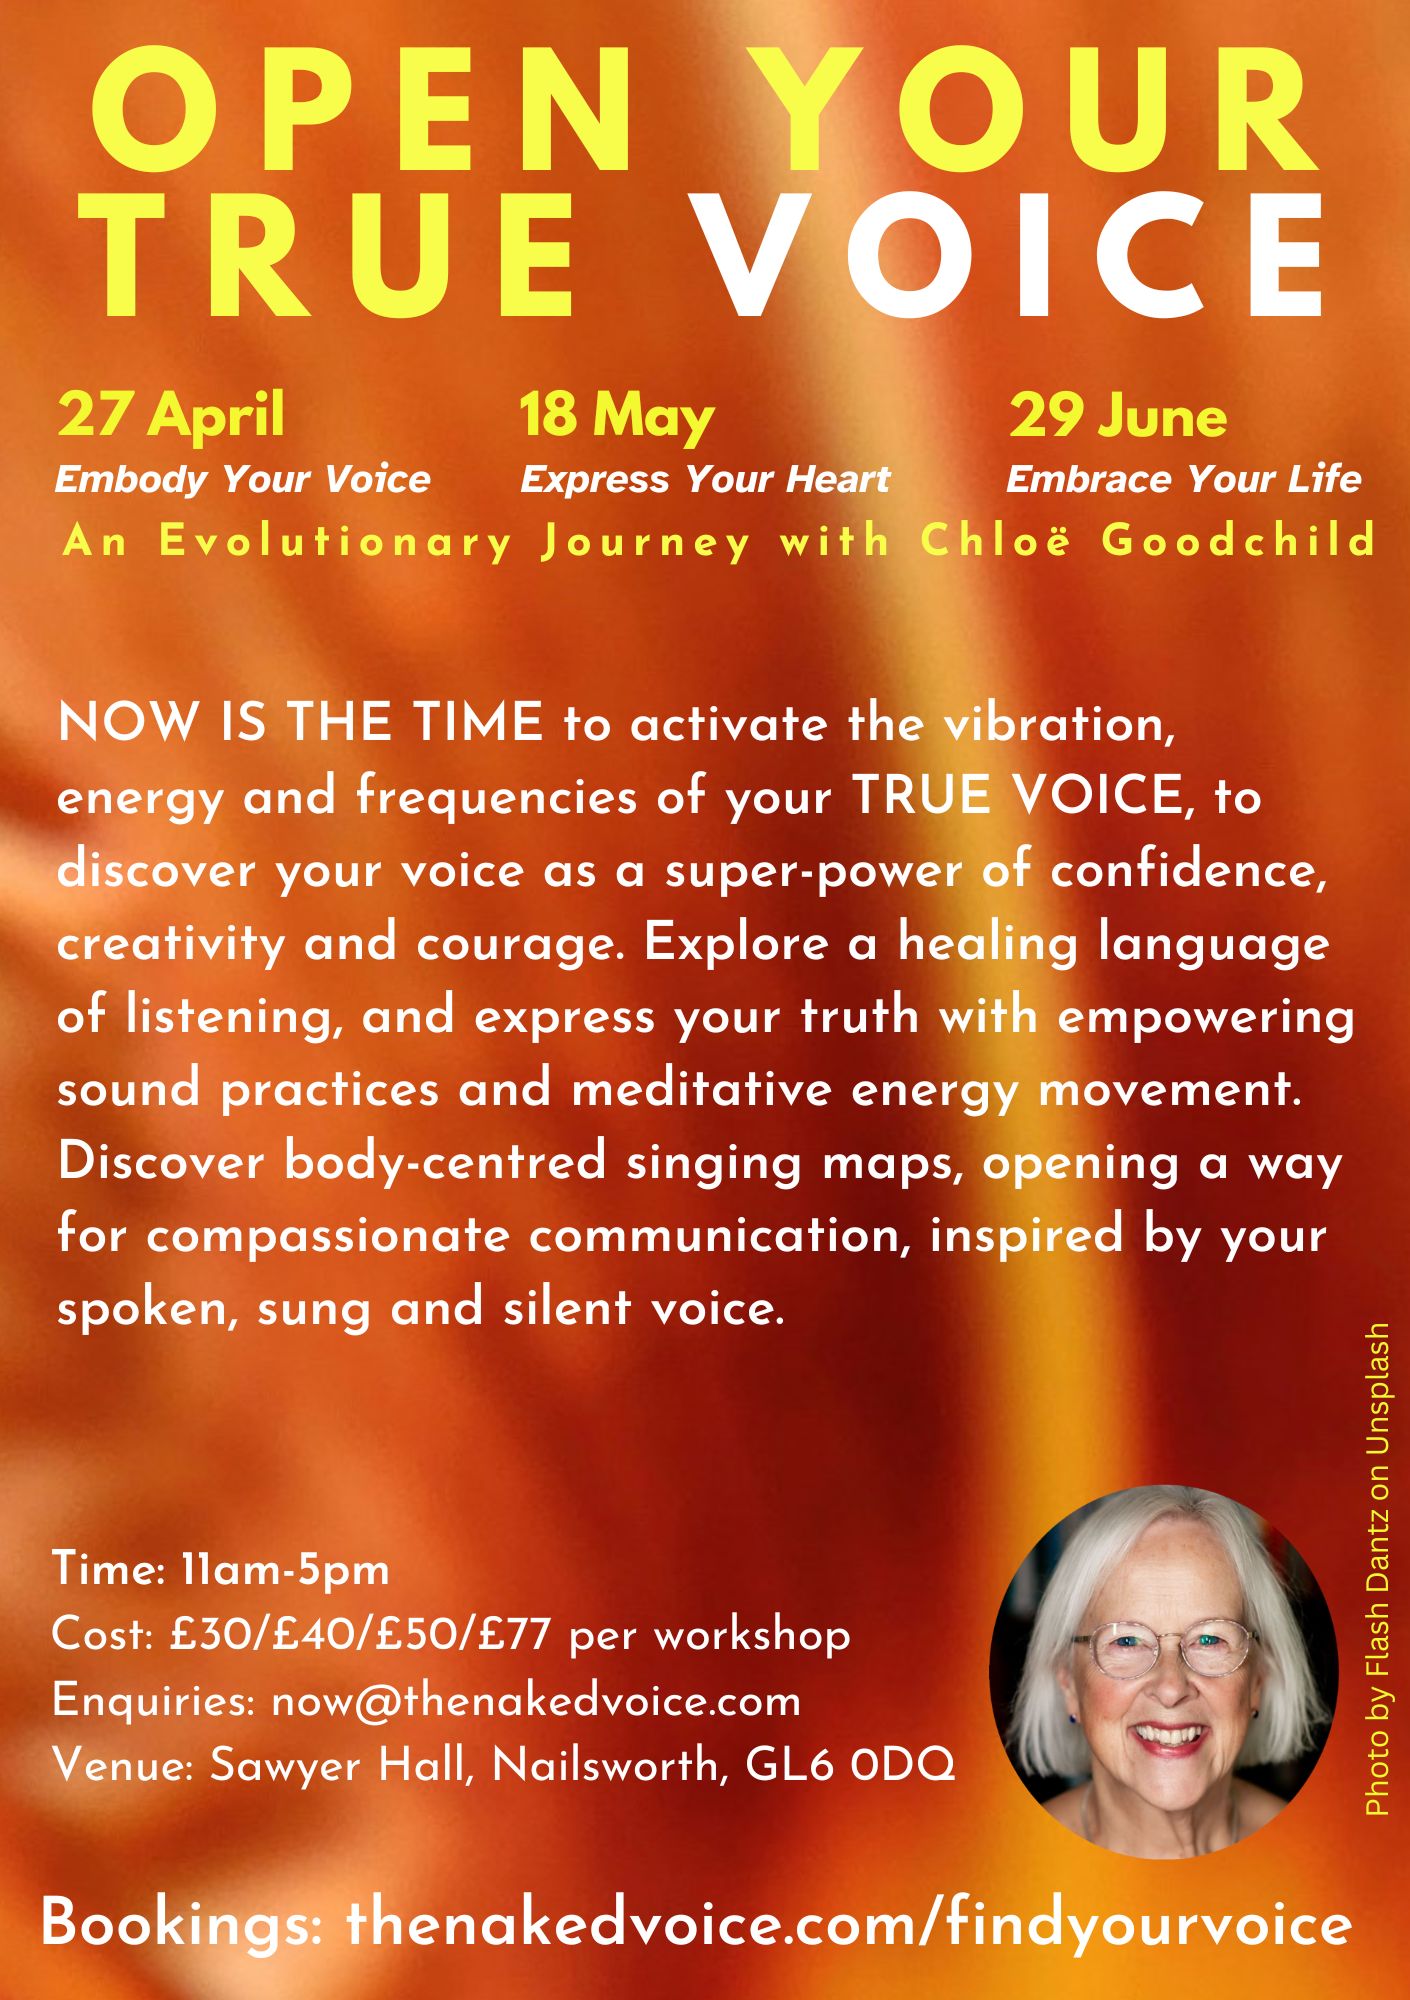 GLOUCESTERSHIRE - OPEN YOUR TRUE VOICE: EMBRACE YOUR LIFE